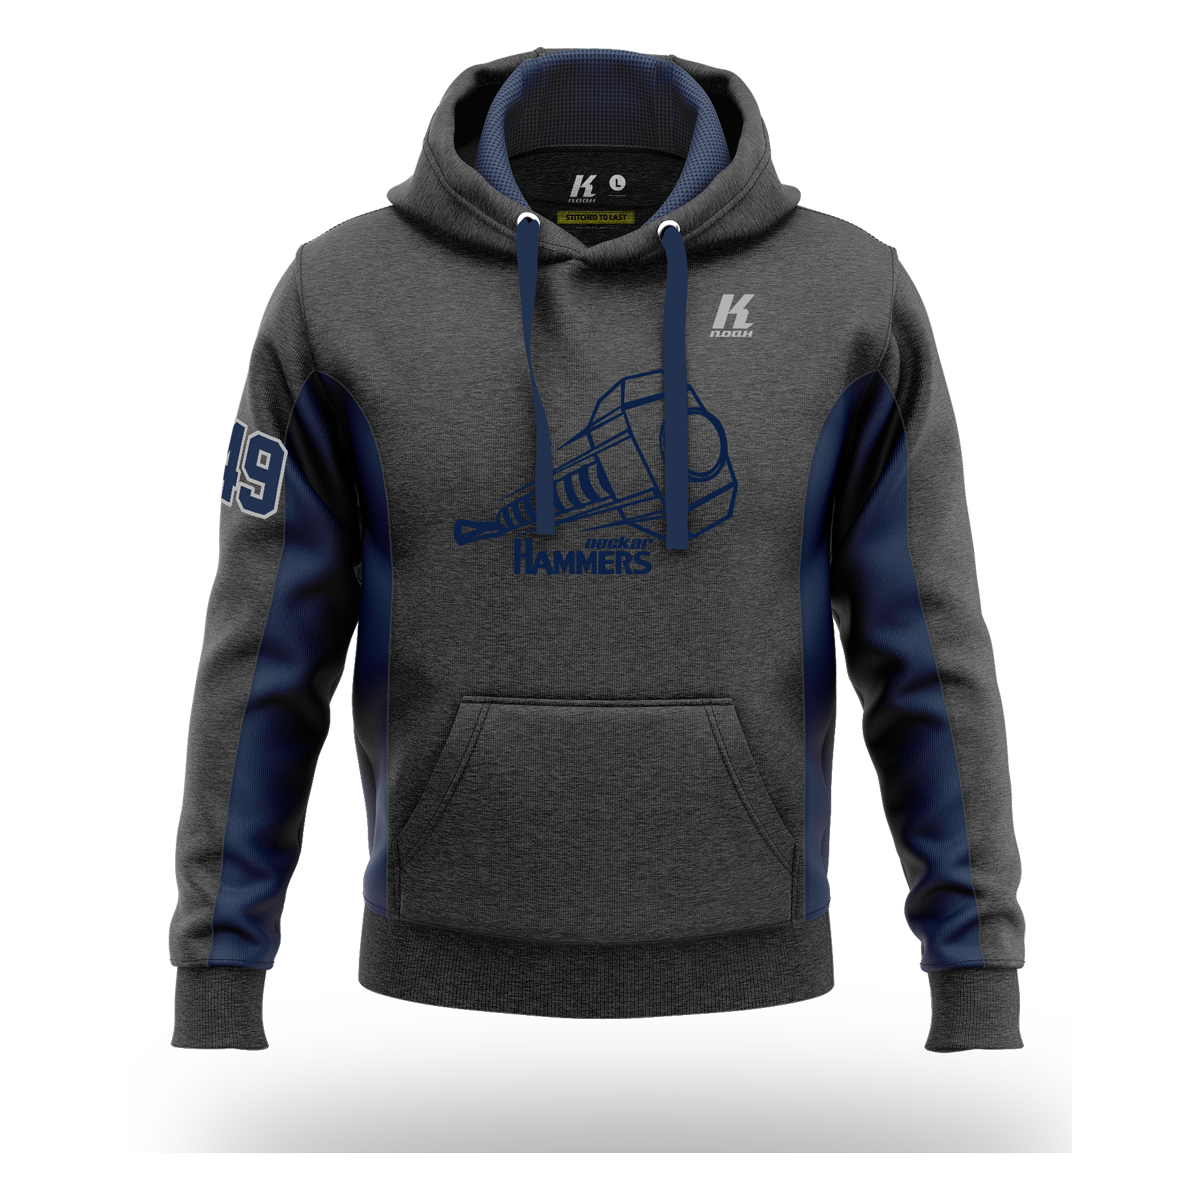 Hammers Signature Series Hoodie with Playernumber/Initials